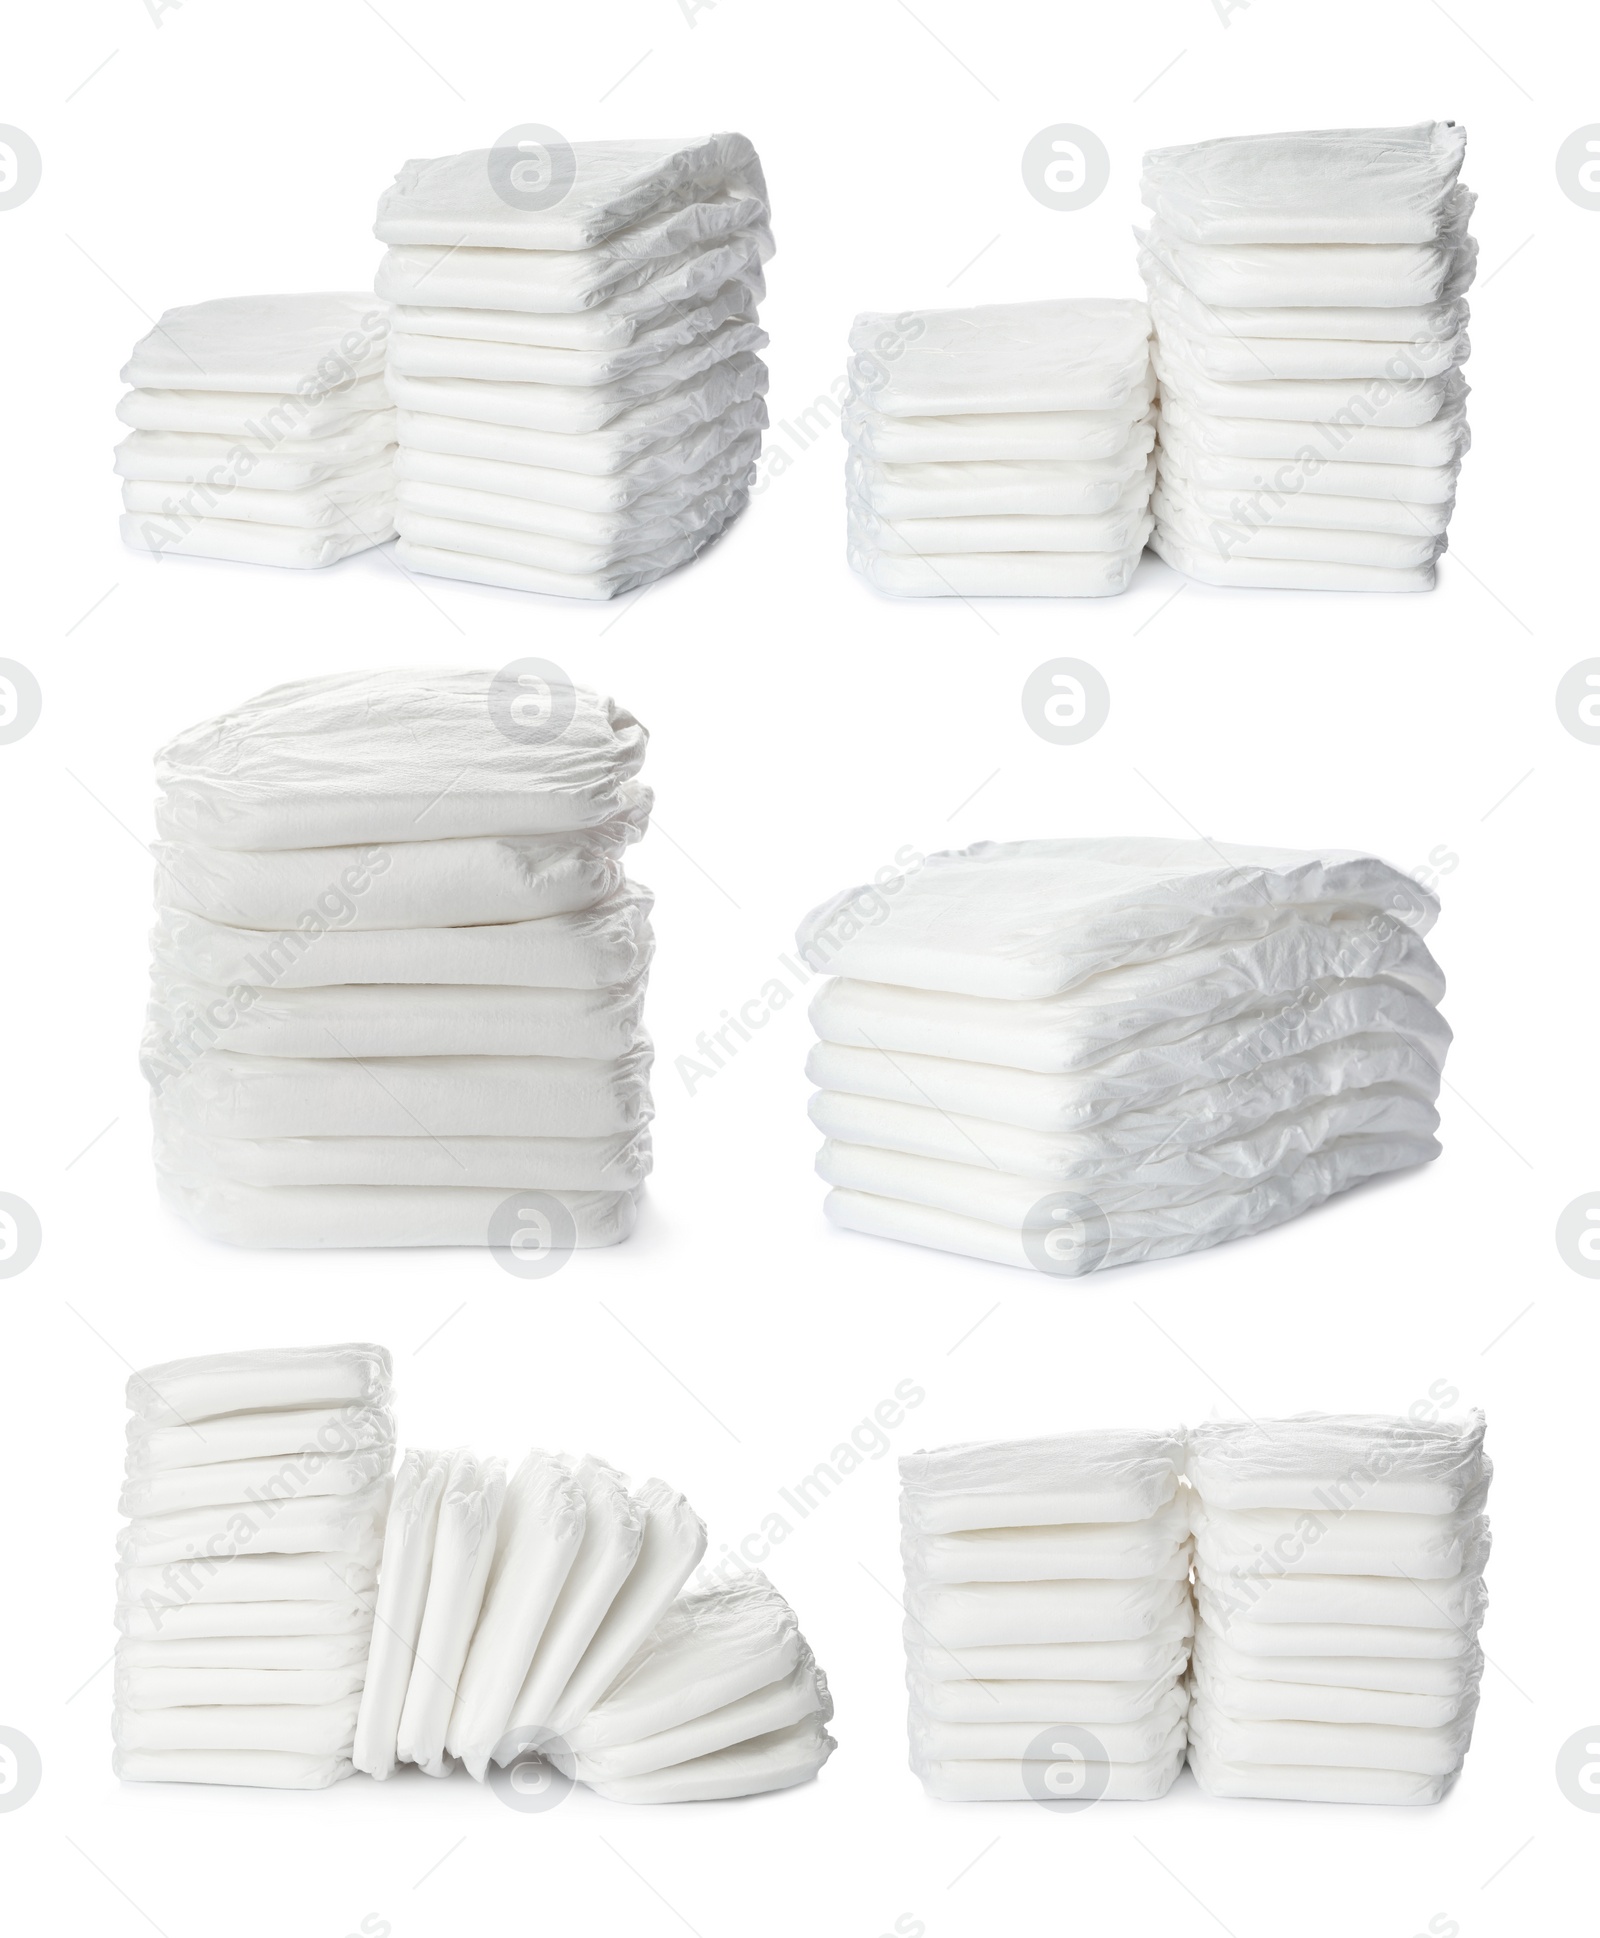 Image of Set of baby diapers on white background